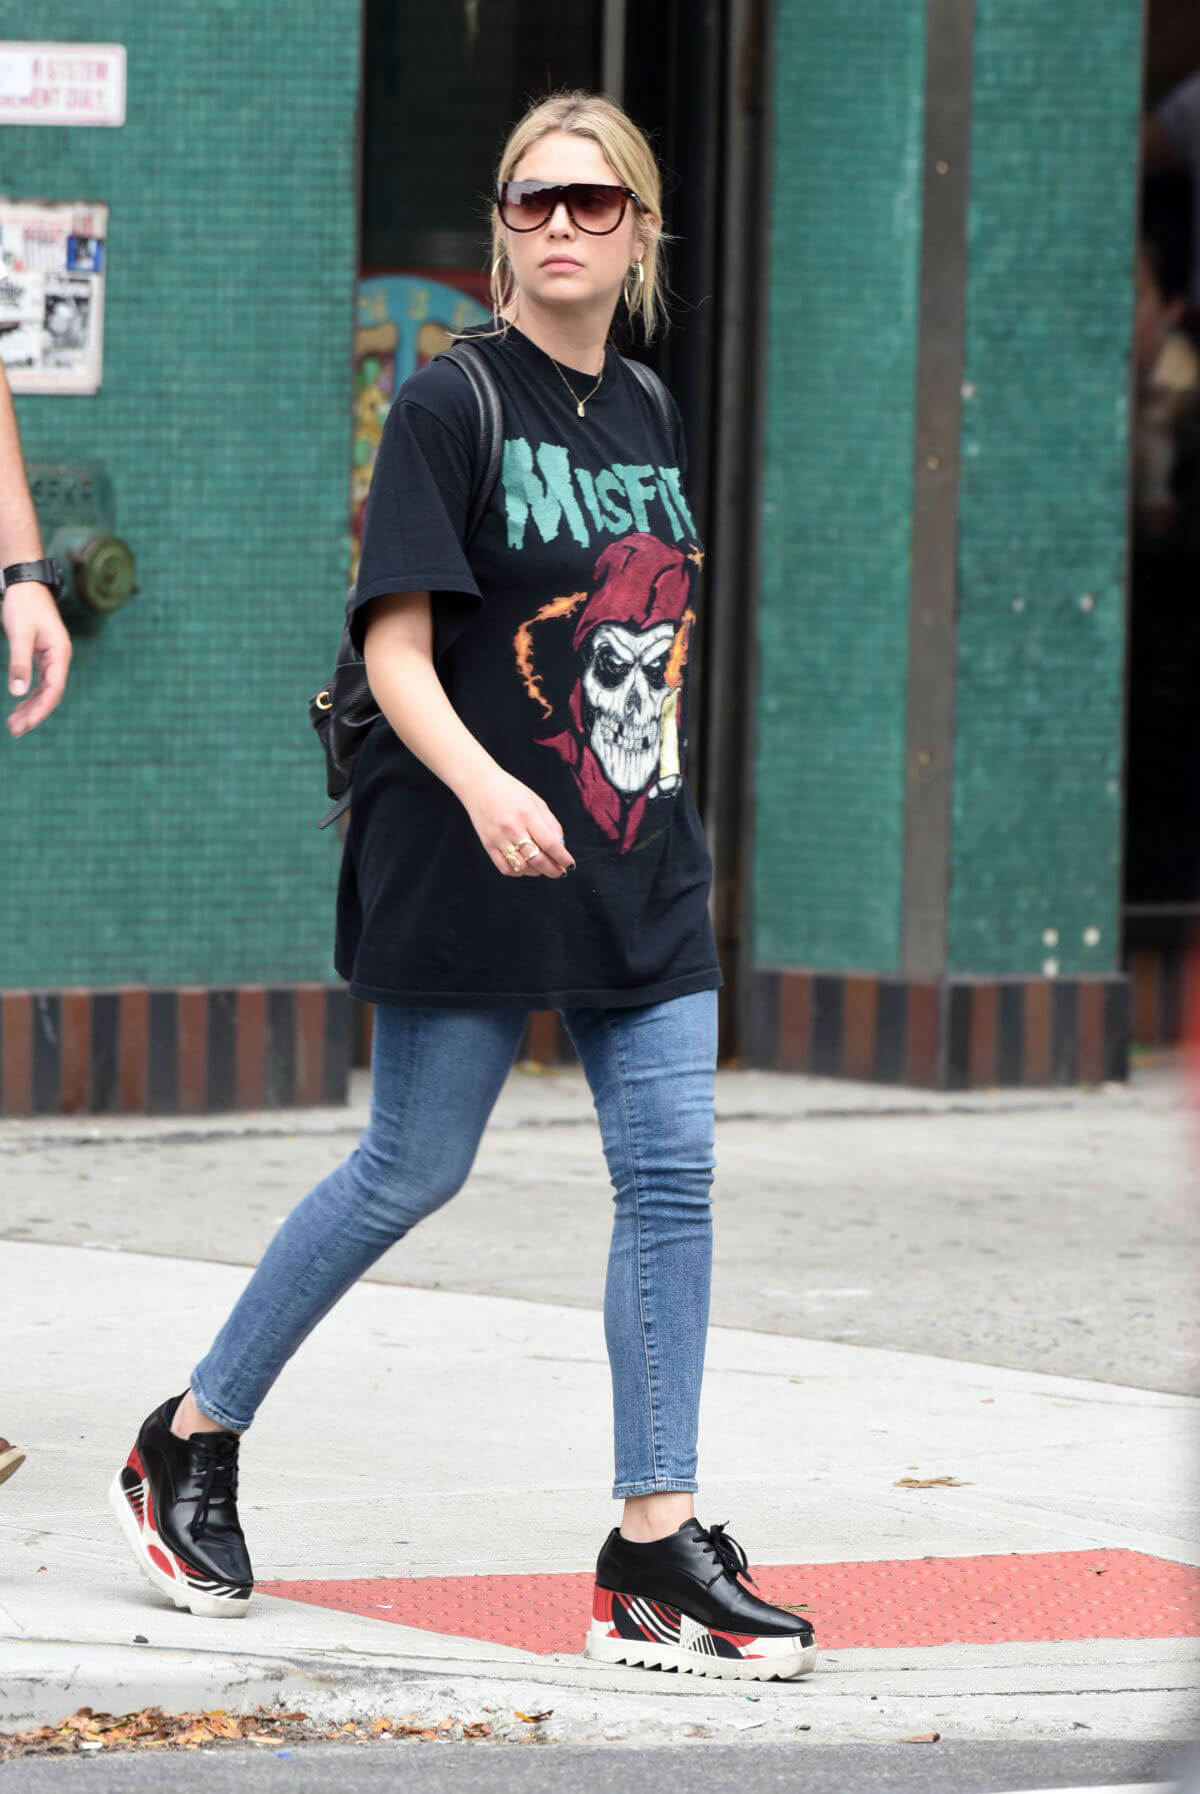 Ashley Benson wears Long T-Shirts and Tight Jeans Out and About in New York